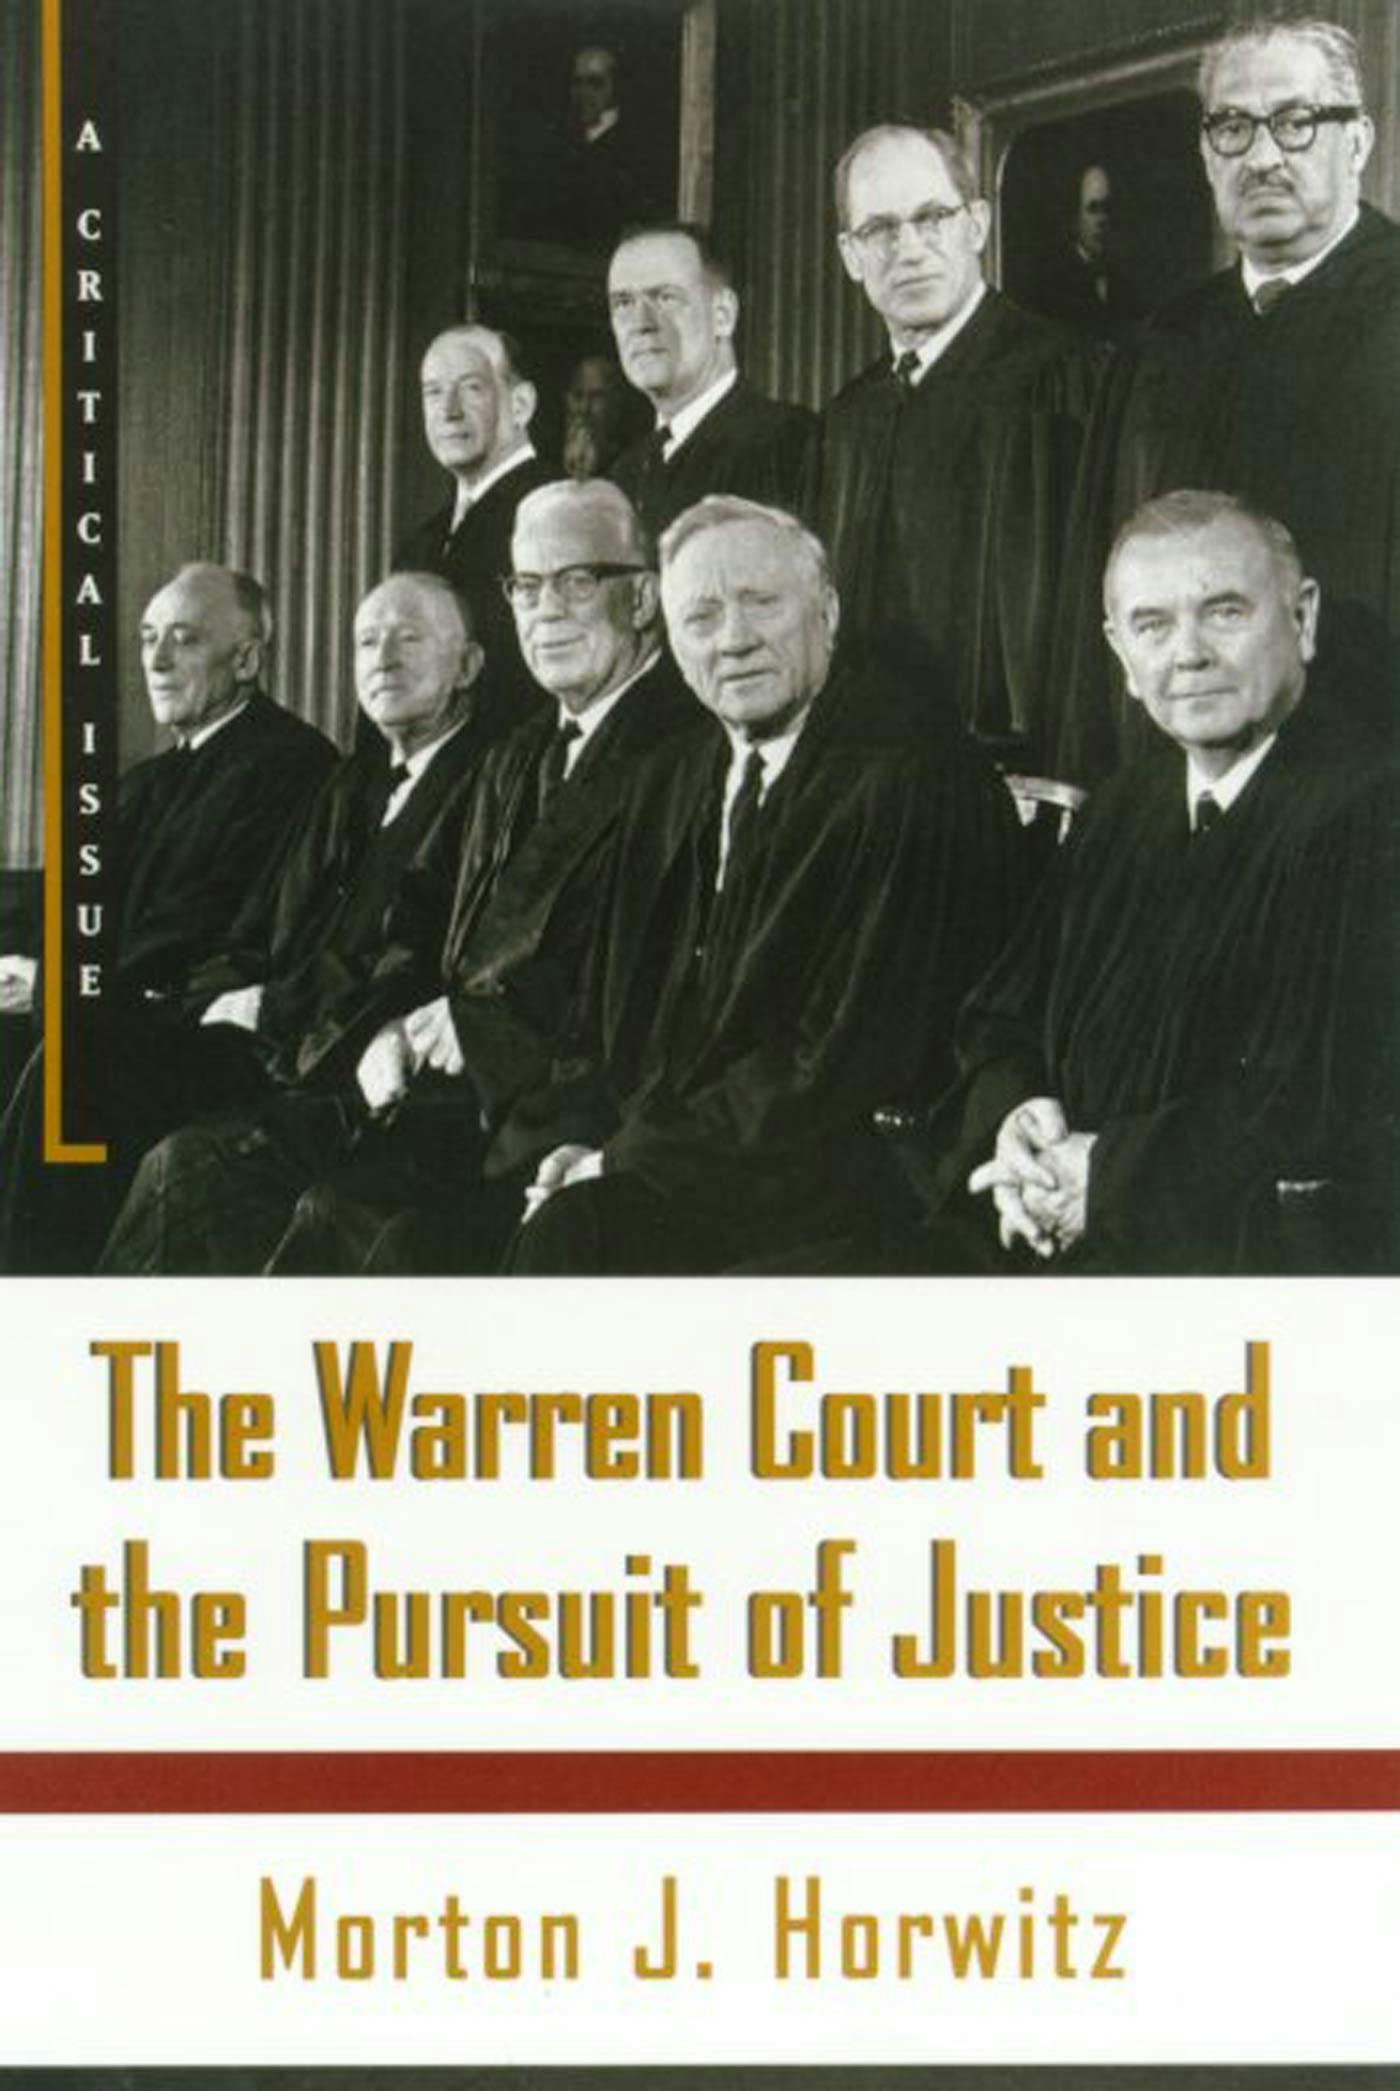 Image of The Warren Court and the Pursuit of Justice